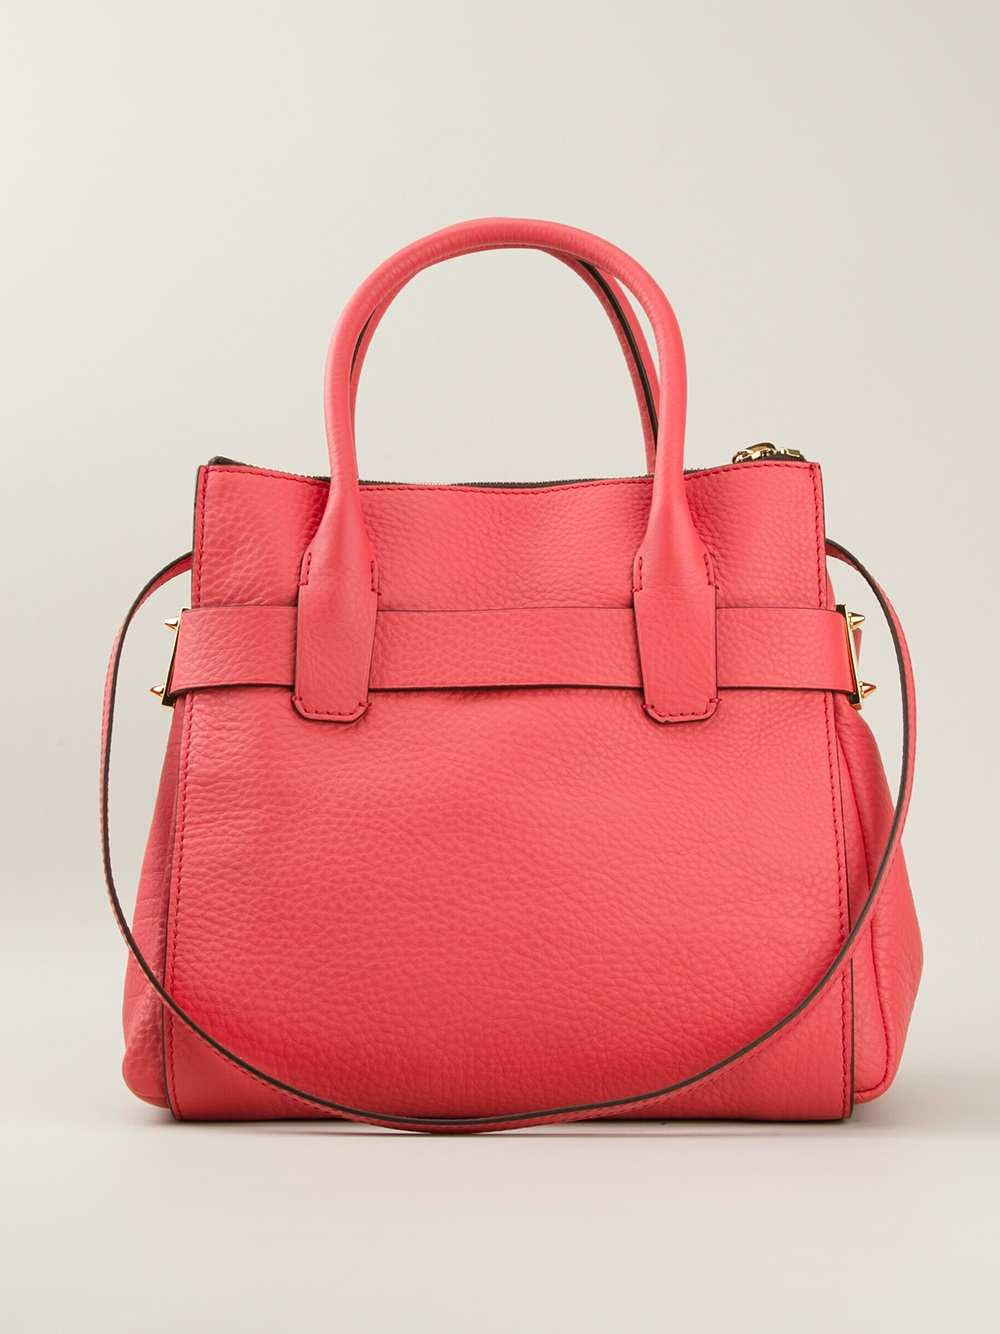 Lyst - Dsquared² Small Tote Bag in Pink